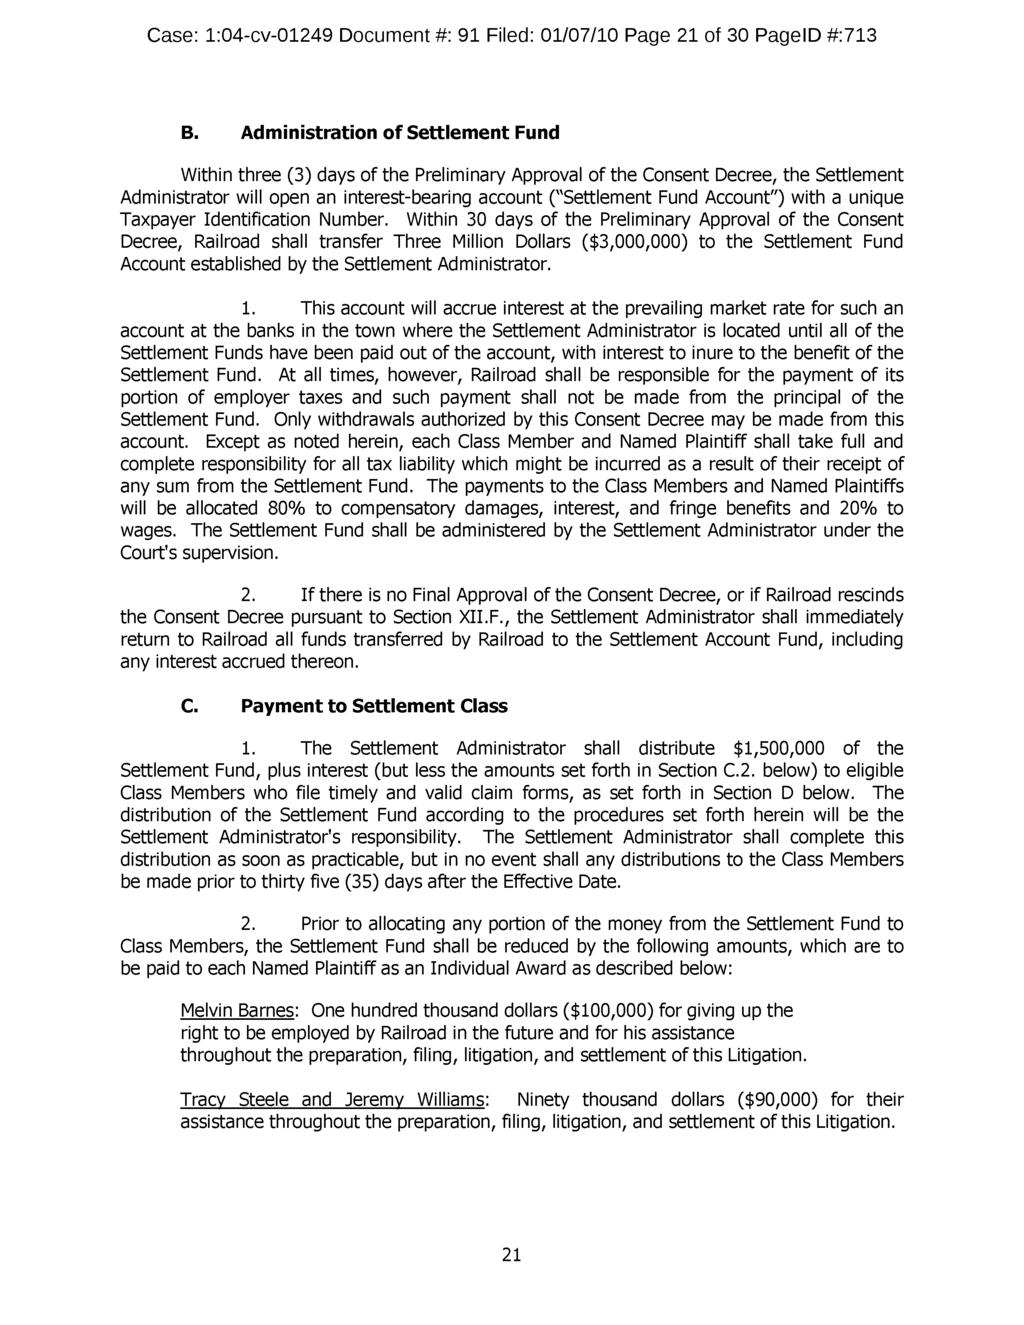 Case: 1:04-cv-01249 Document #: 91 Filed: 01/07/10 Page 21 of 30 PagelD #:713 B.